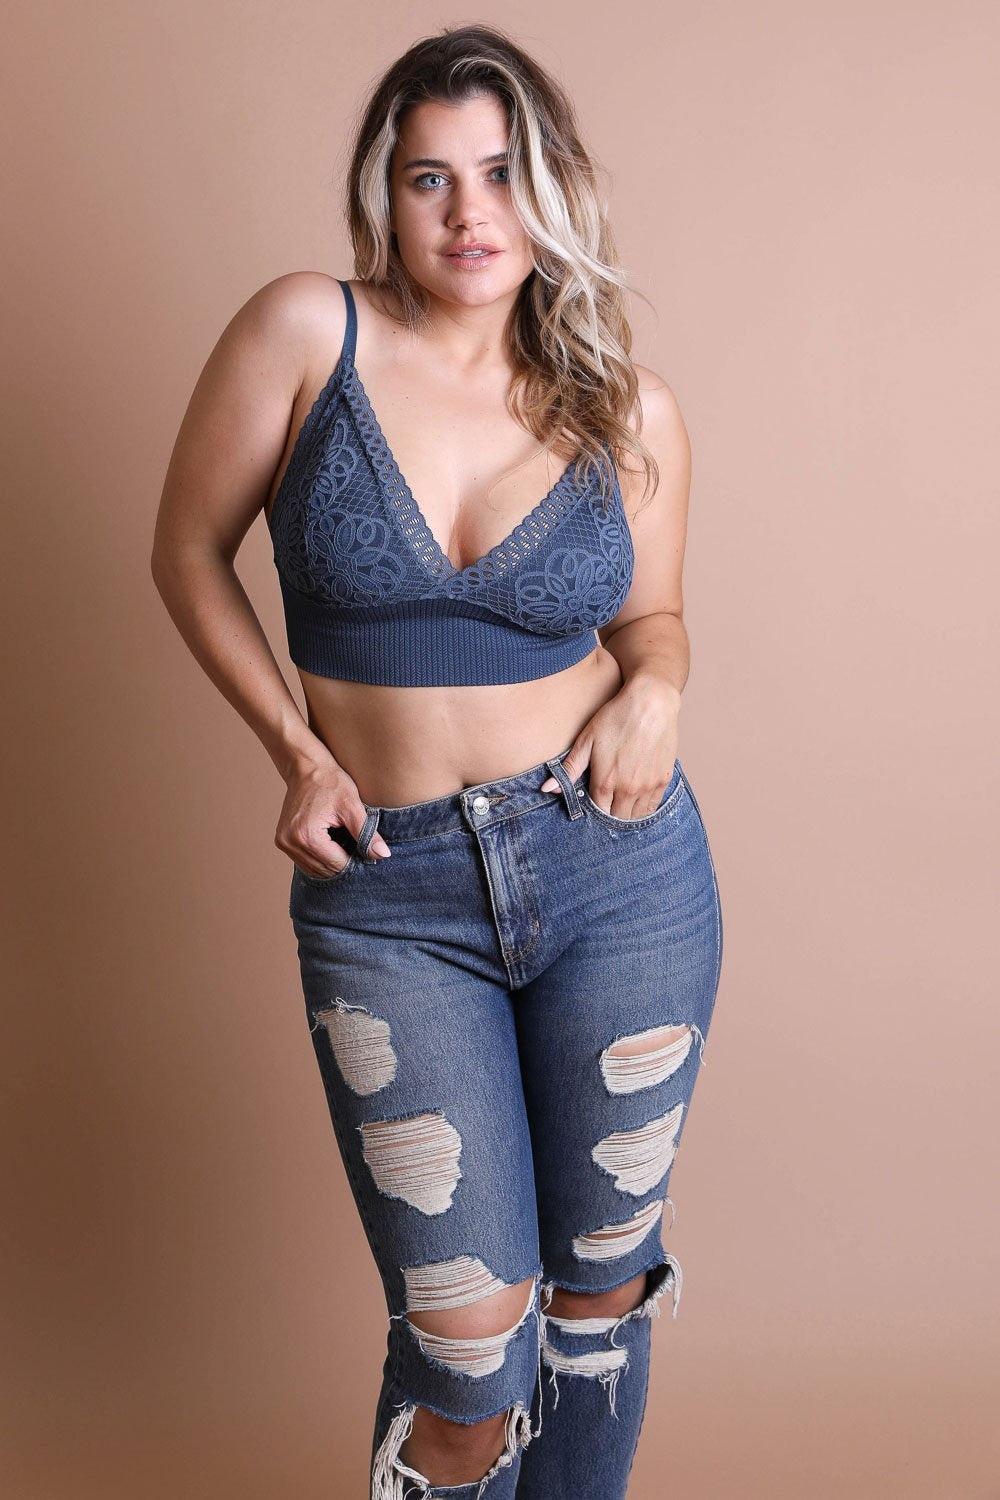 Leto Collection - Plus Size Waistband Loop Lace Brami – Thank you